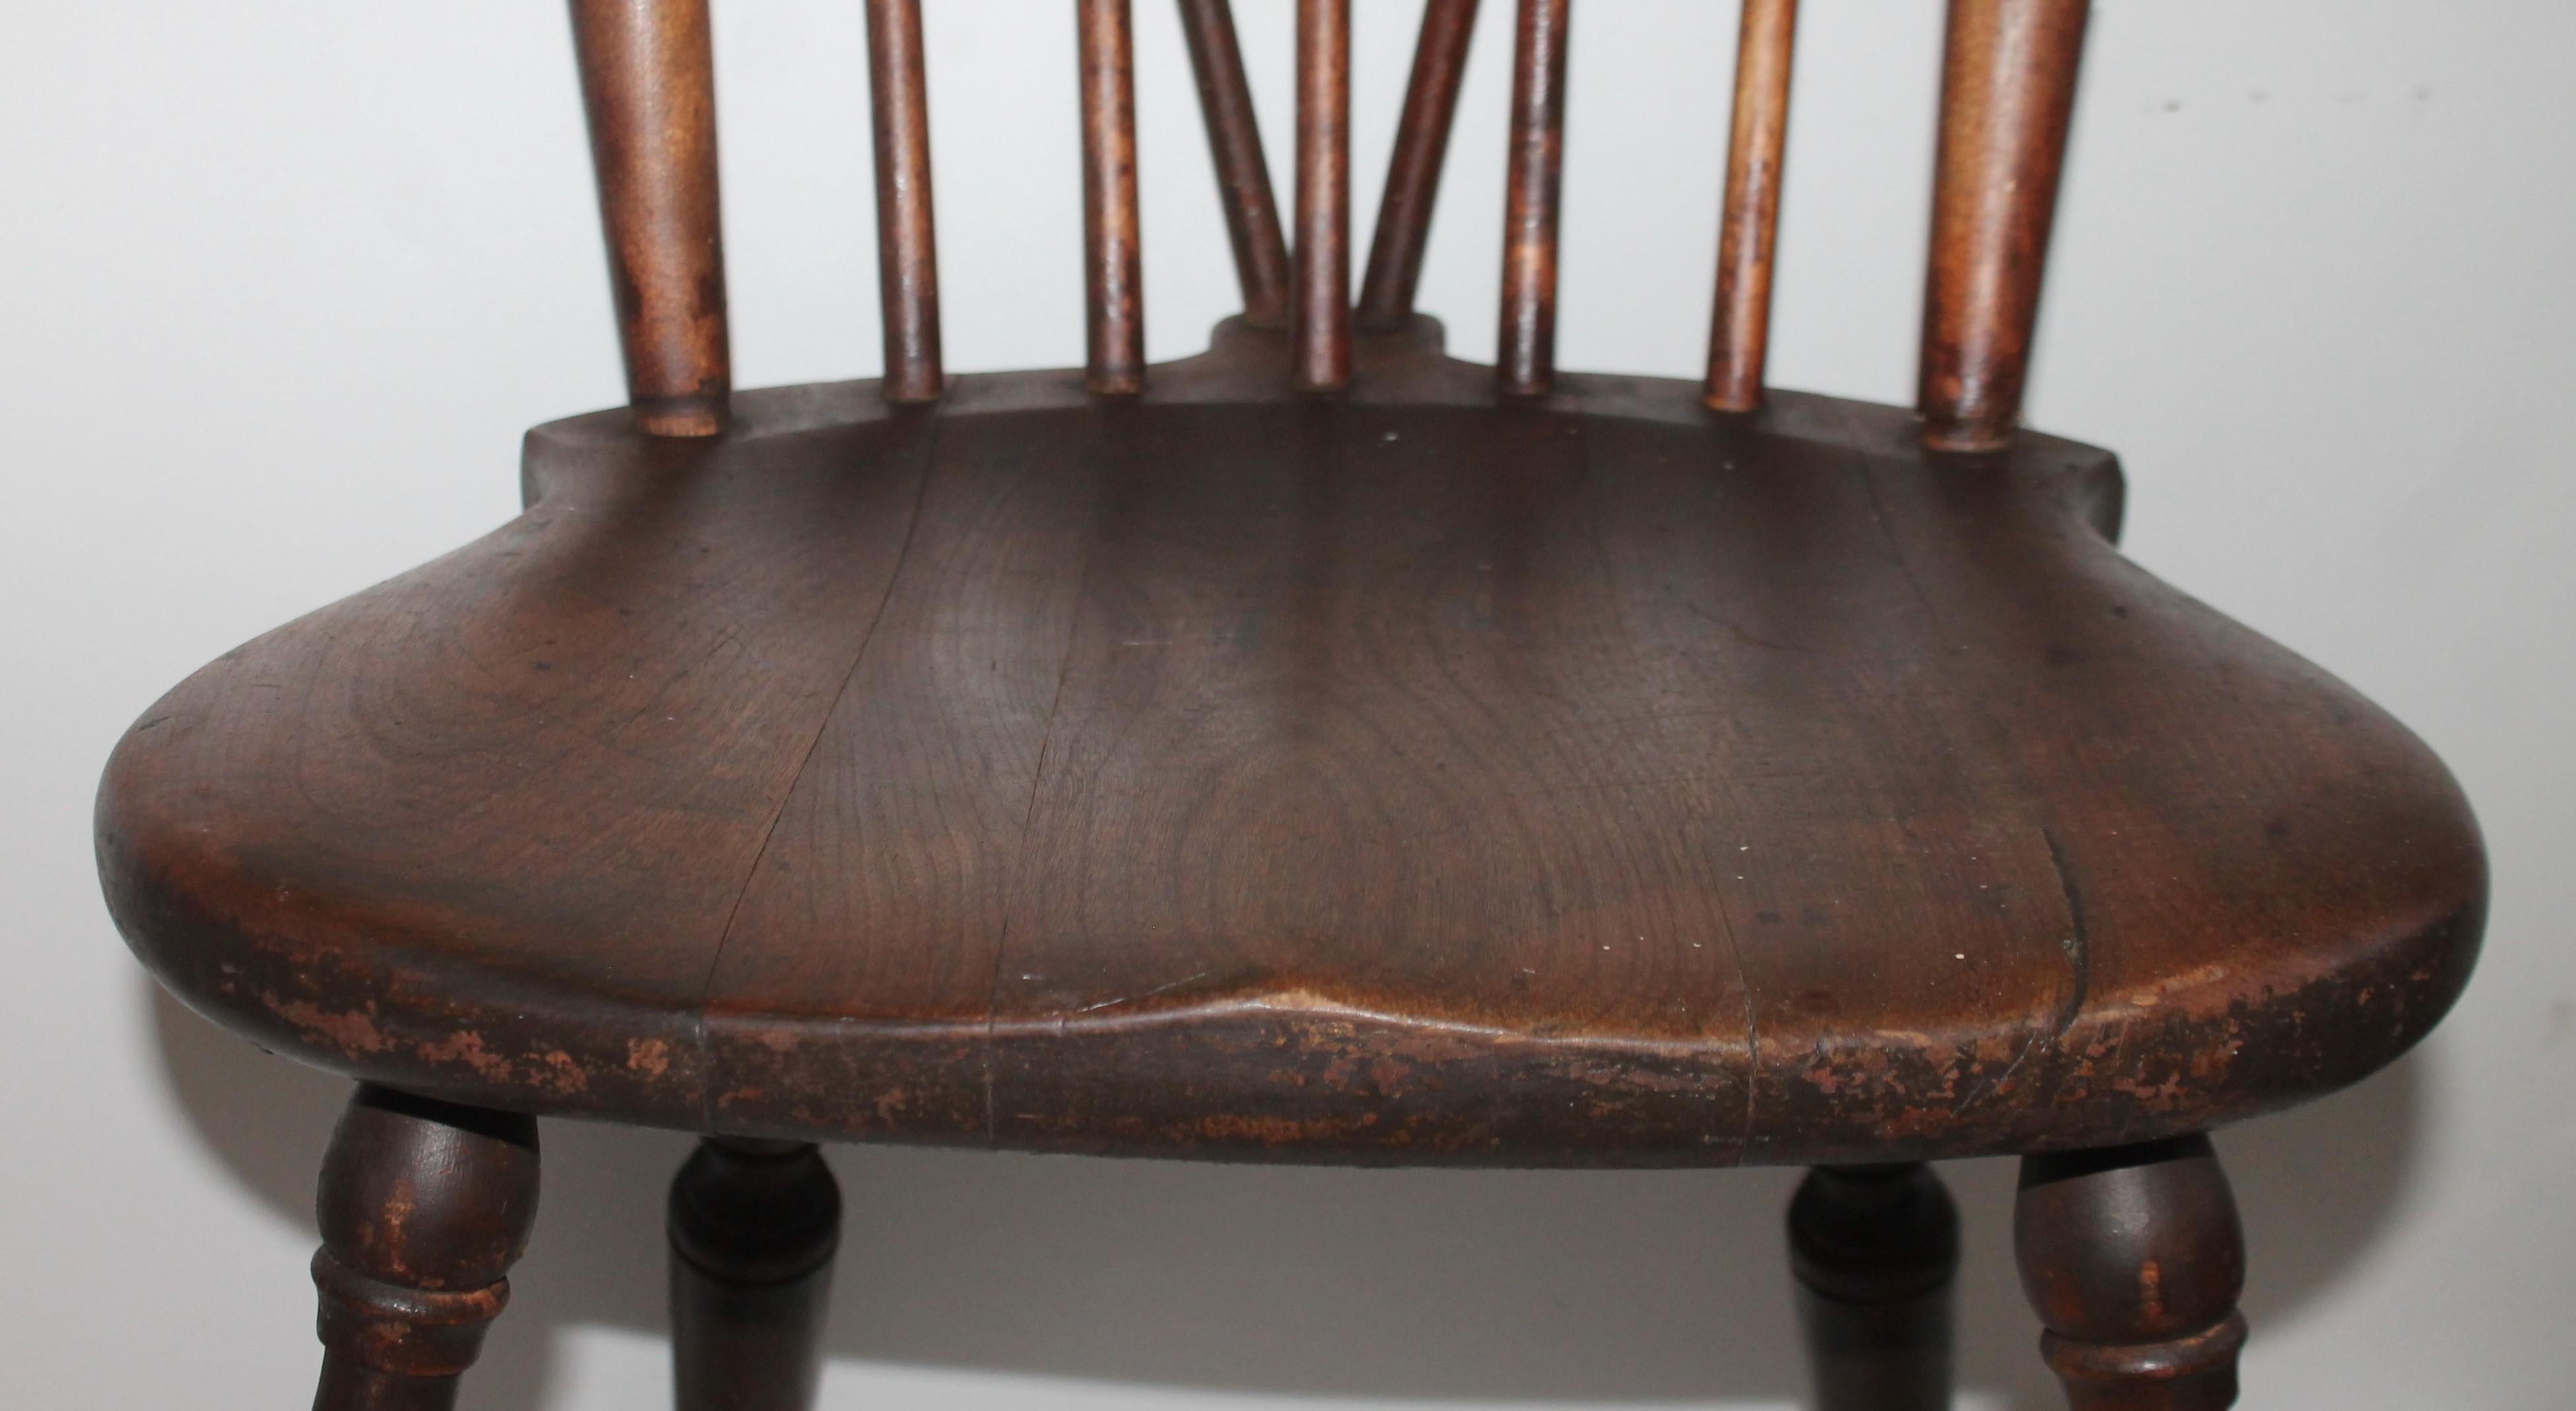 Hand-Crafted 19th Century Brace Back Windsor Chair with Saddle Seat